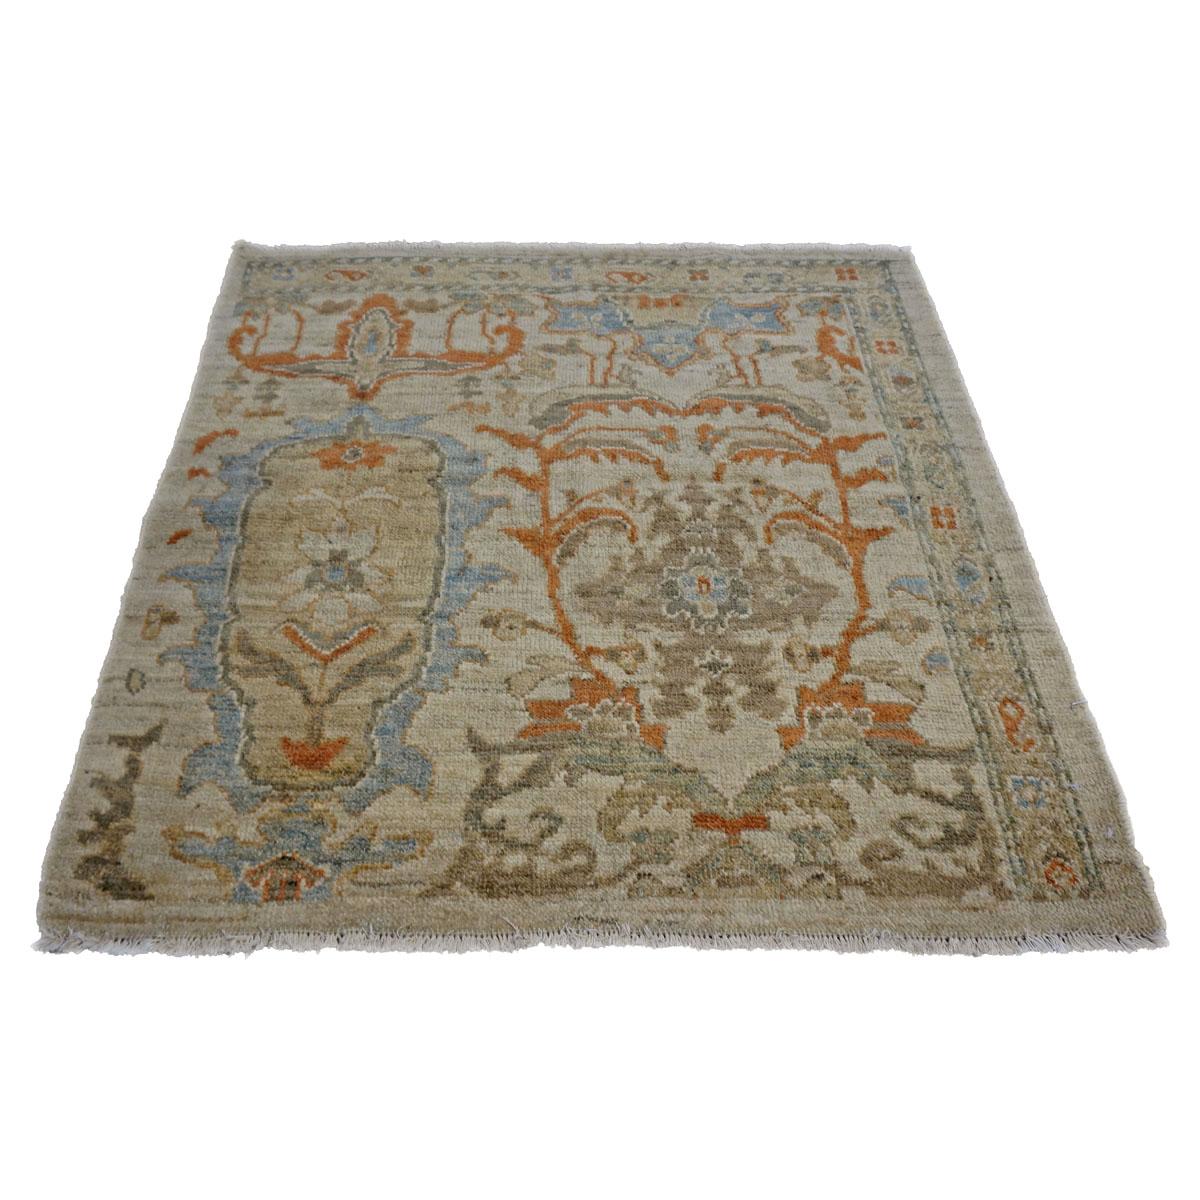 21st Century Persian Sultanabad Master 3x3 Ivory, Rust, & Blue Handmade Area Rug In Excellent Condition For Sale In Houston, TX